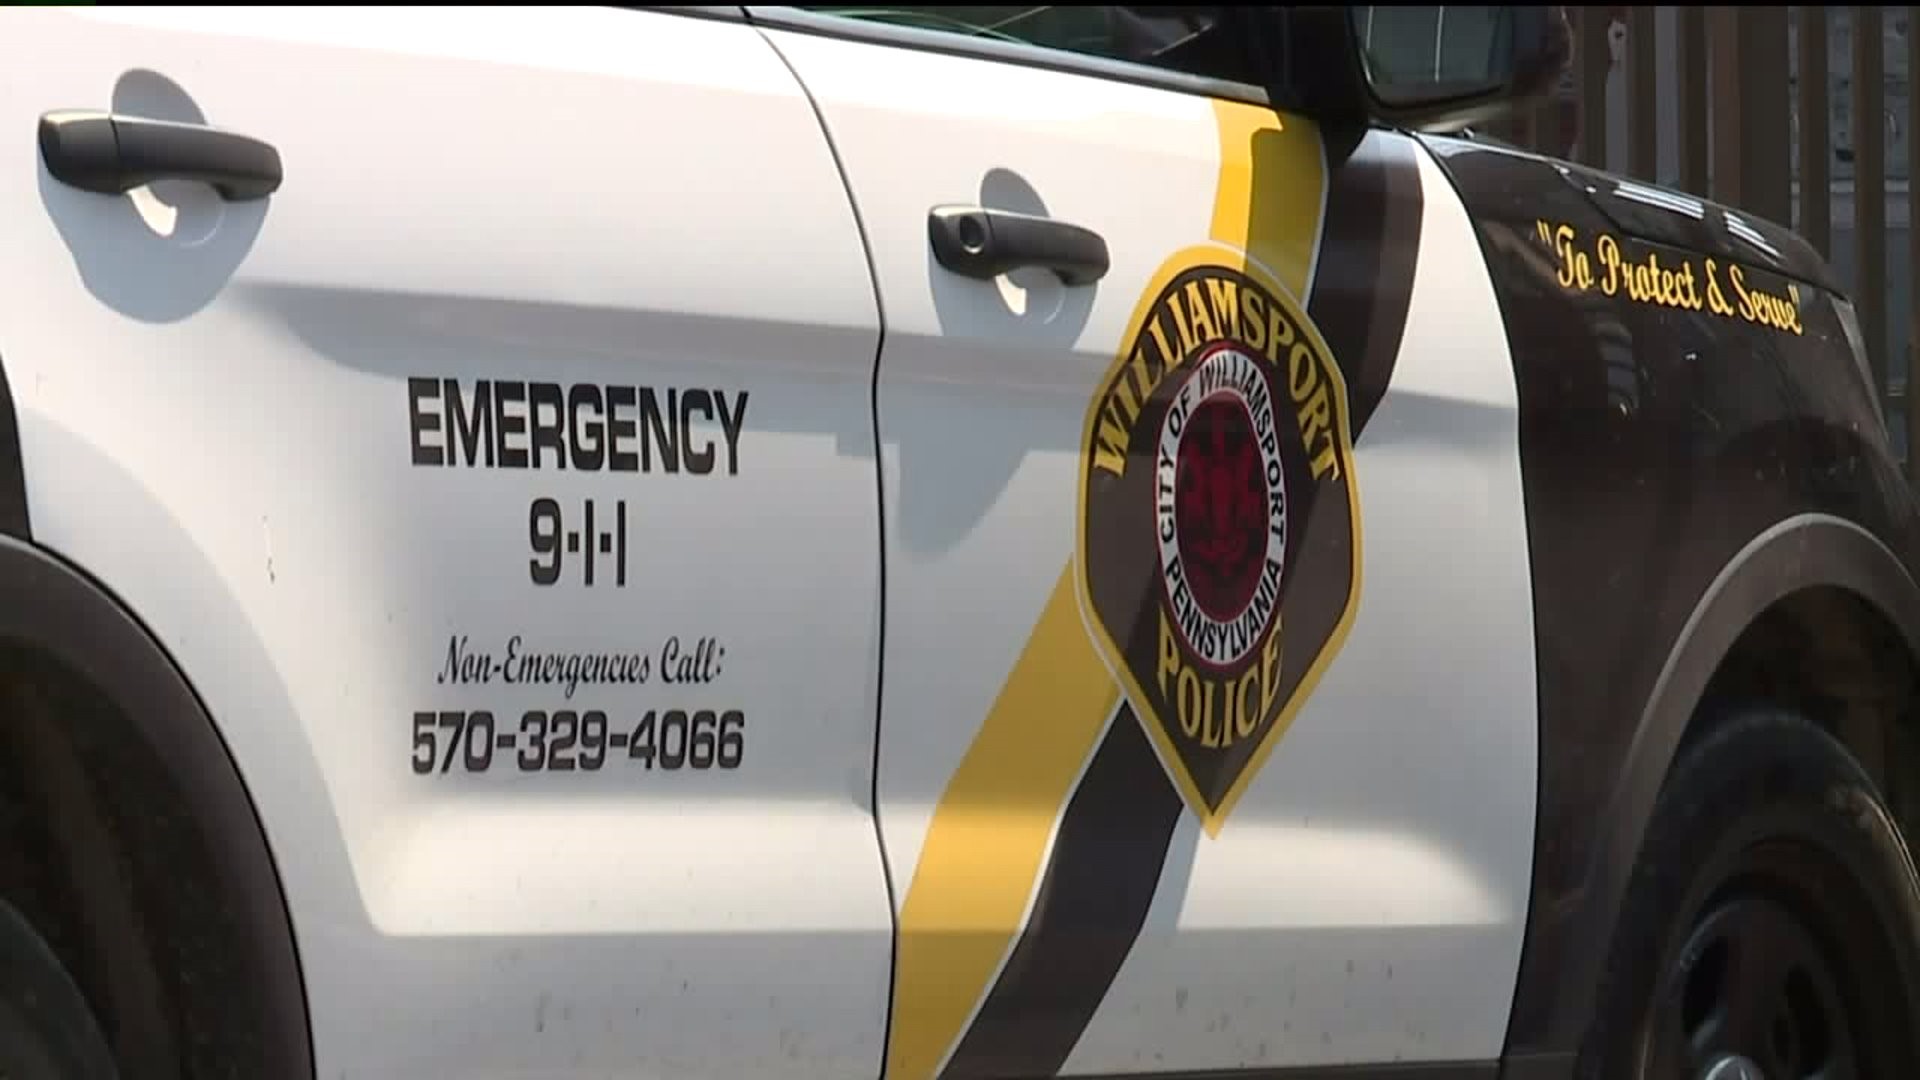 City Leaders Address Recent Violence in Williamsport